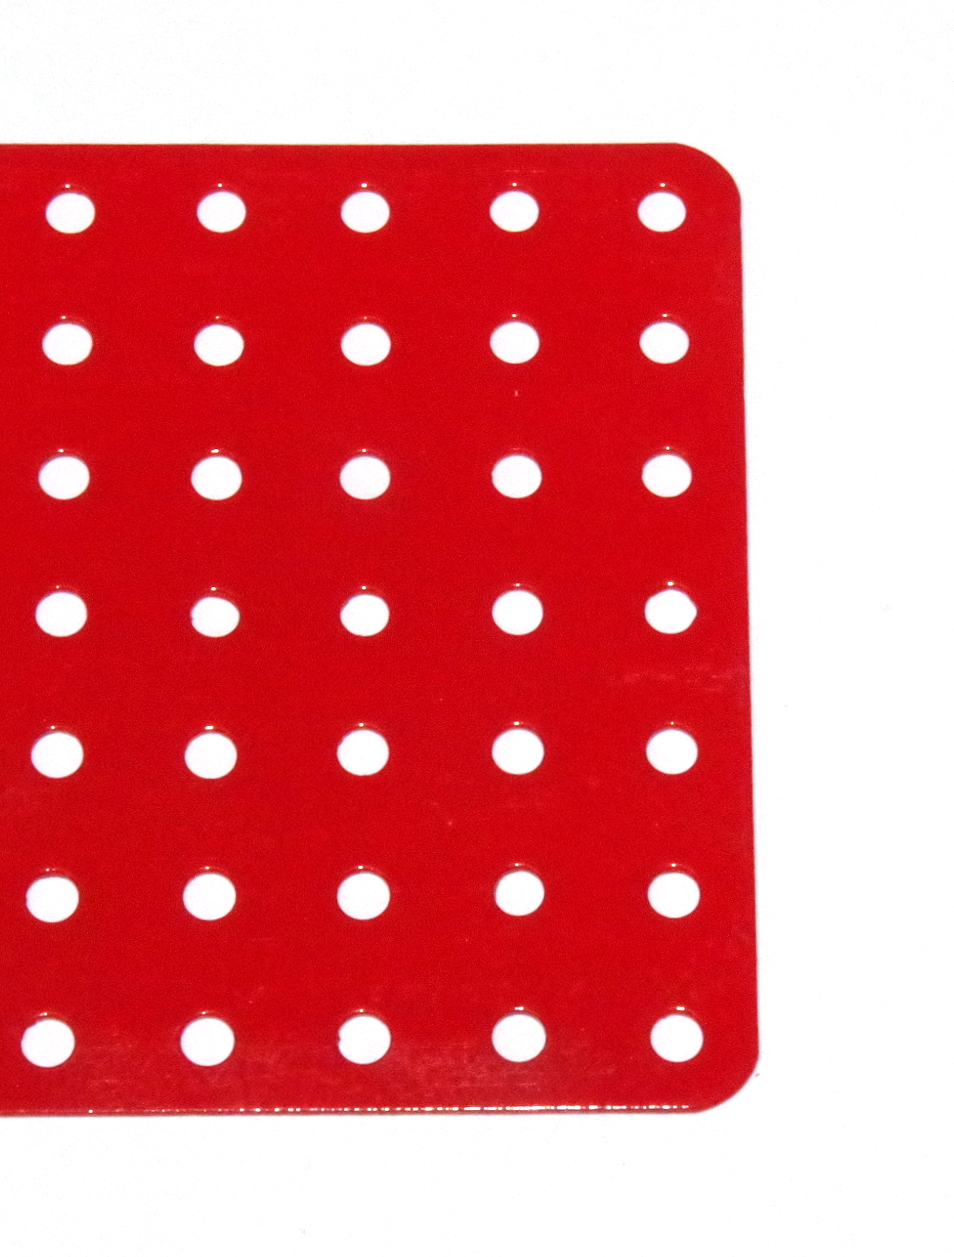 52f Flat Plate 7x7 Hole Red